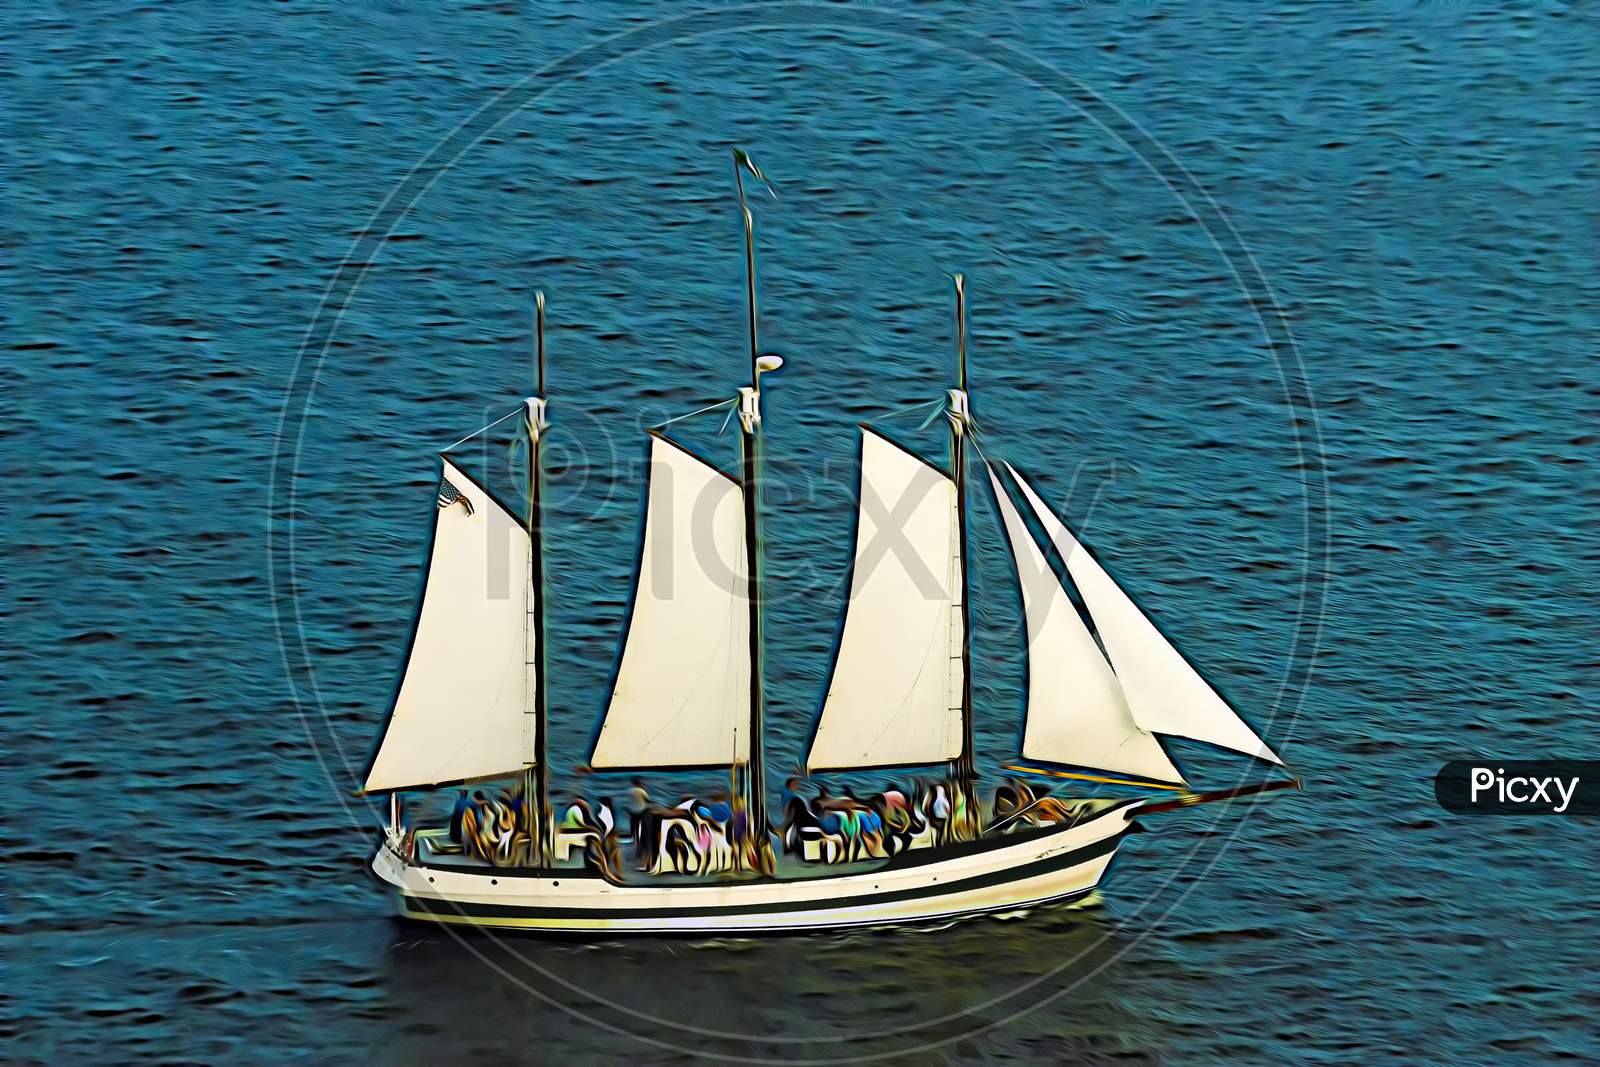 Swirly Artistic Oil Painting Treatment Of Schooner Sailboat Cruising On Blue Water